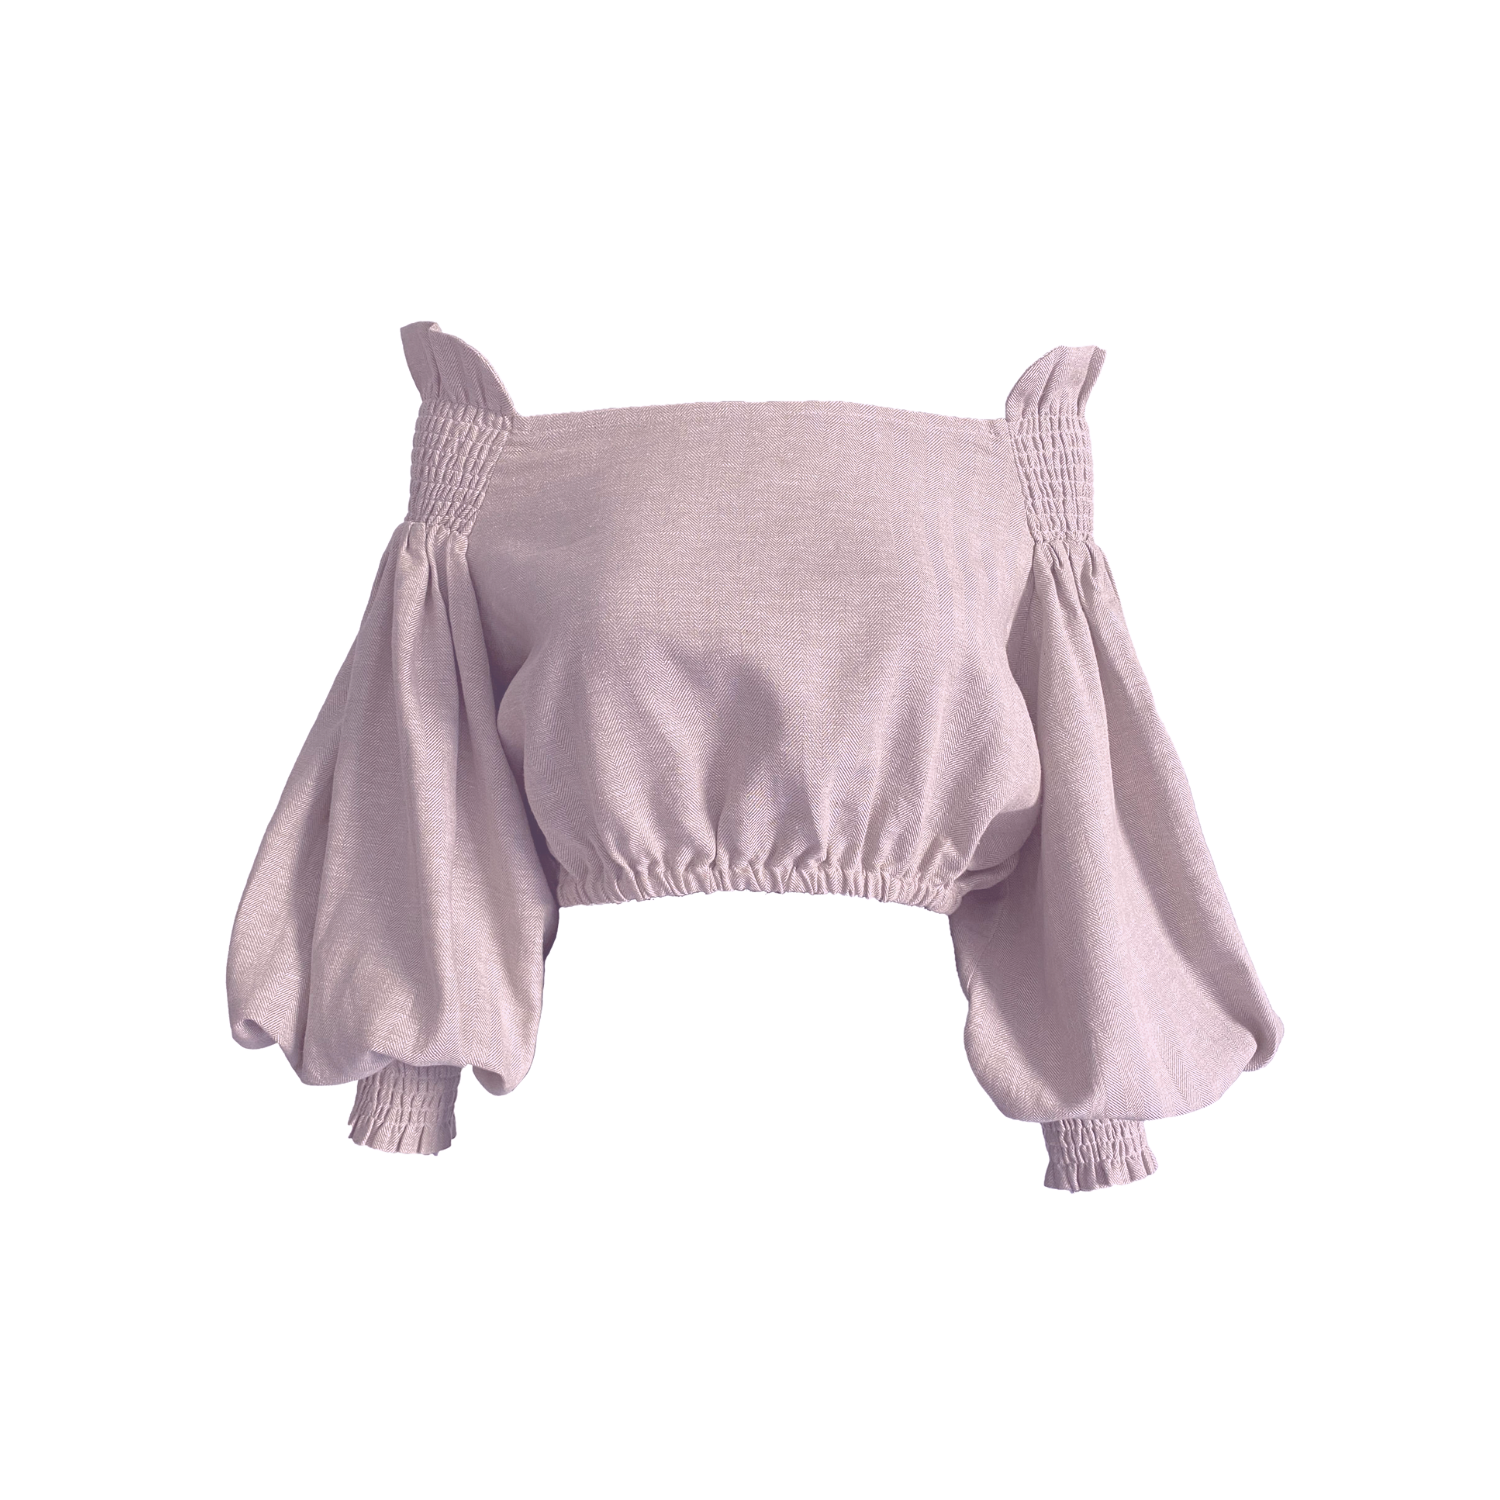 Shirred Crop Top in Lilac